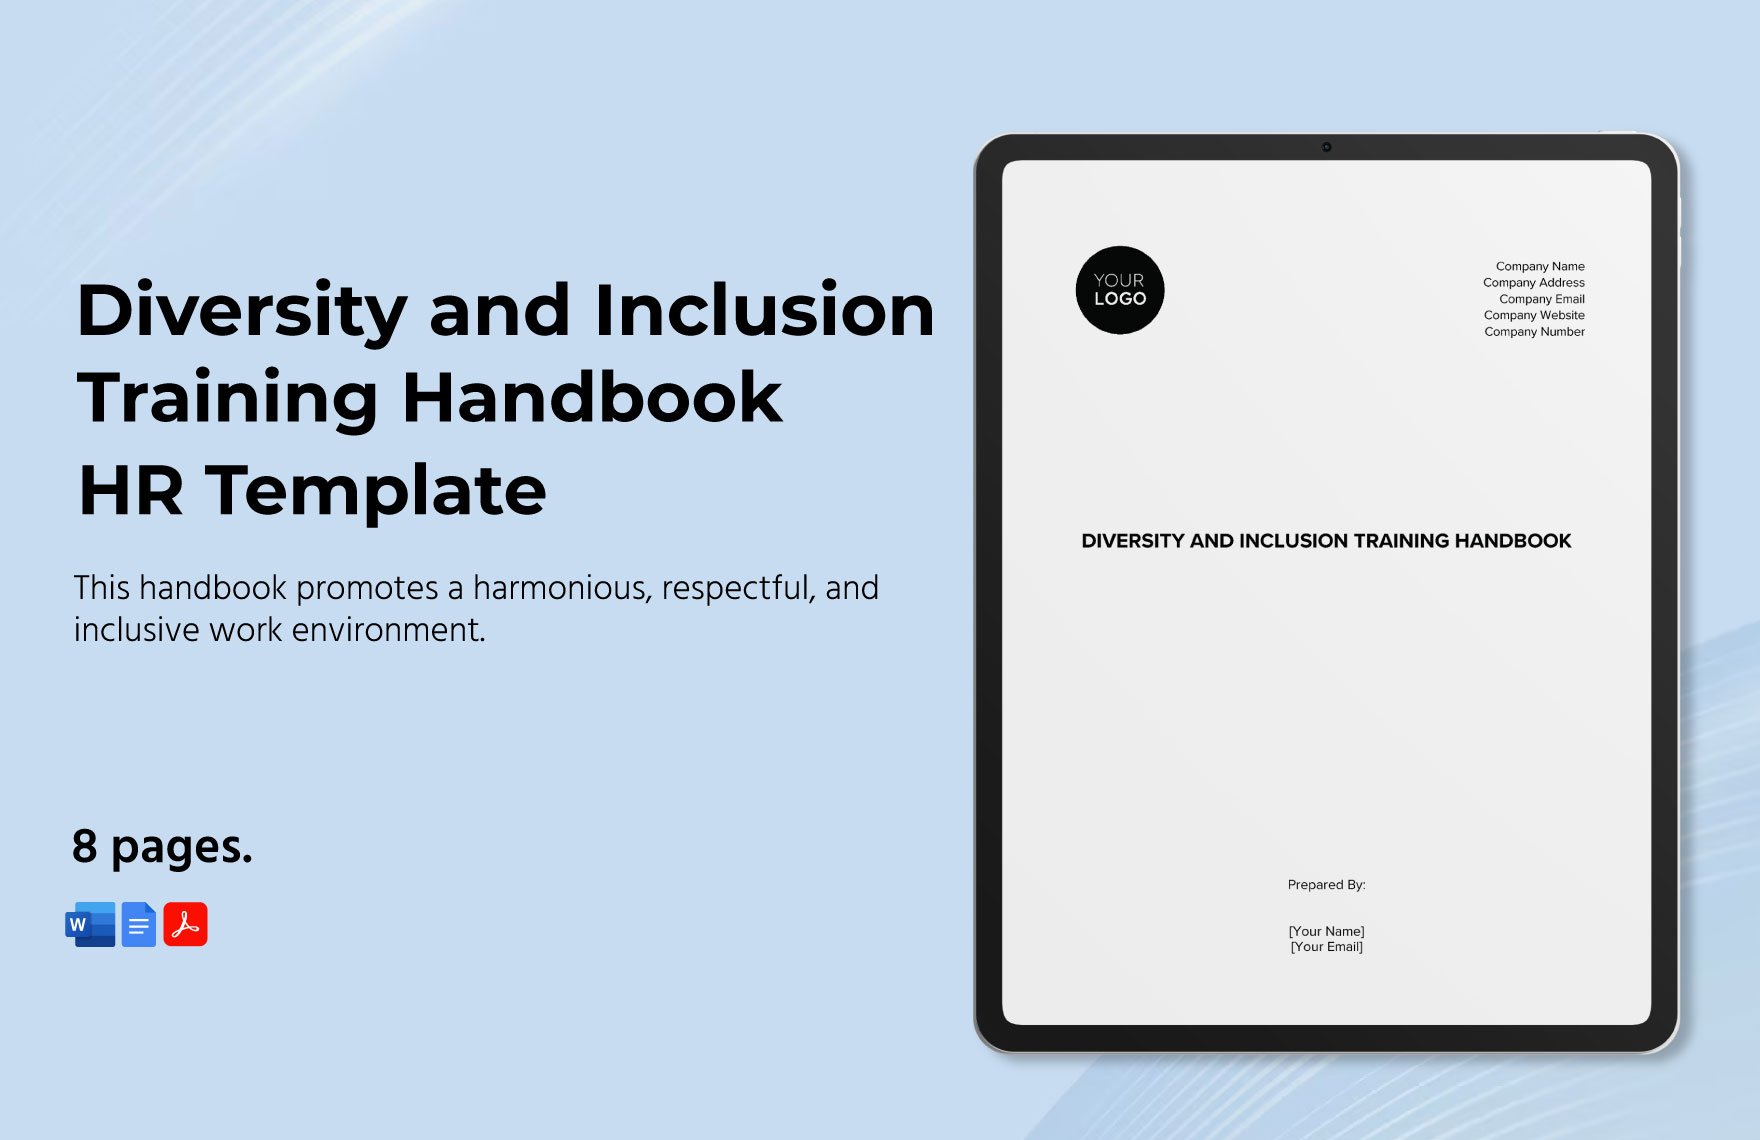 Diversity and Inclusion Training Handbook HR Template